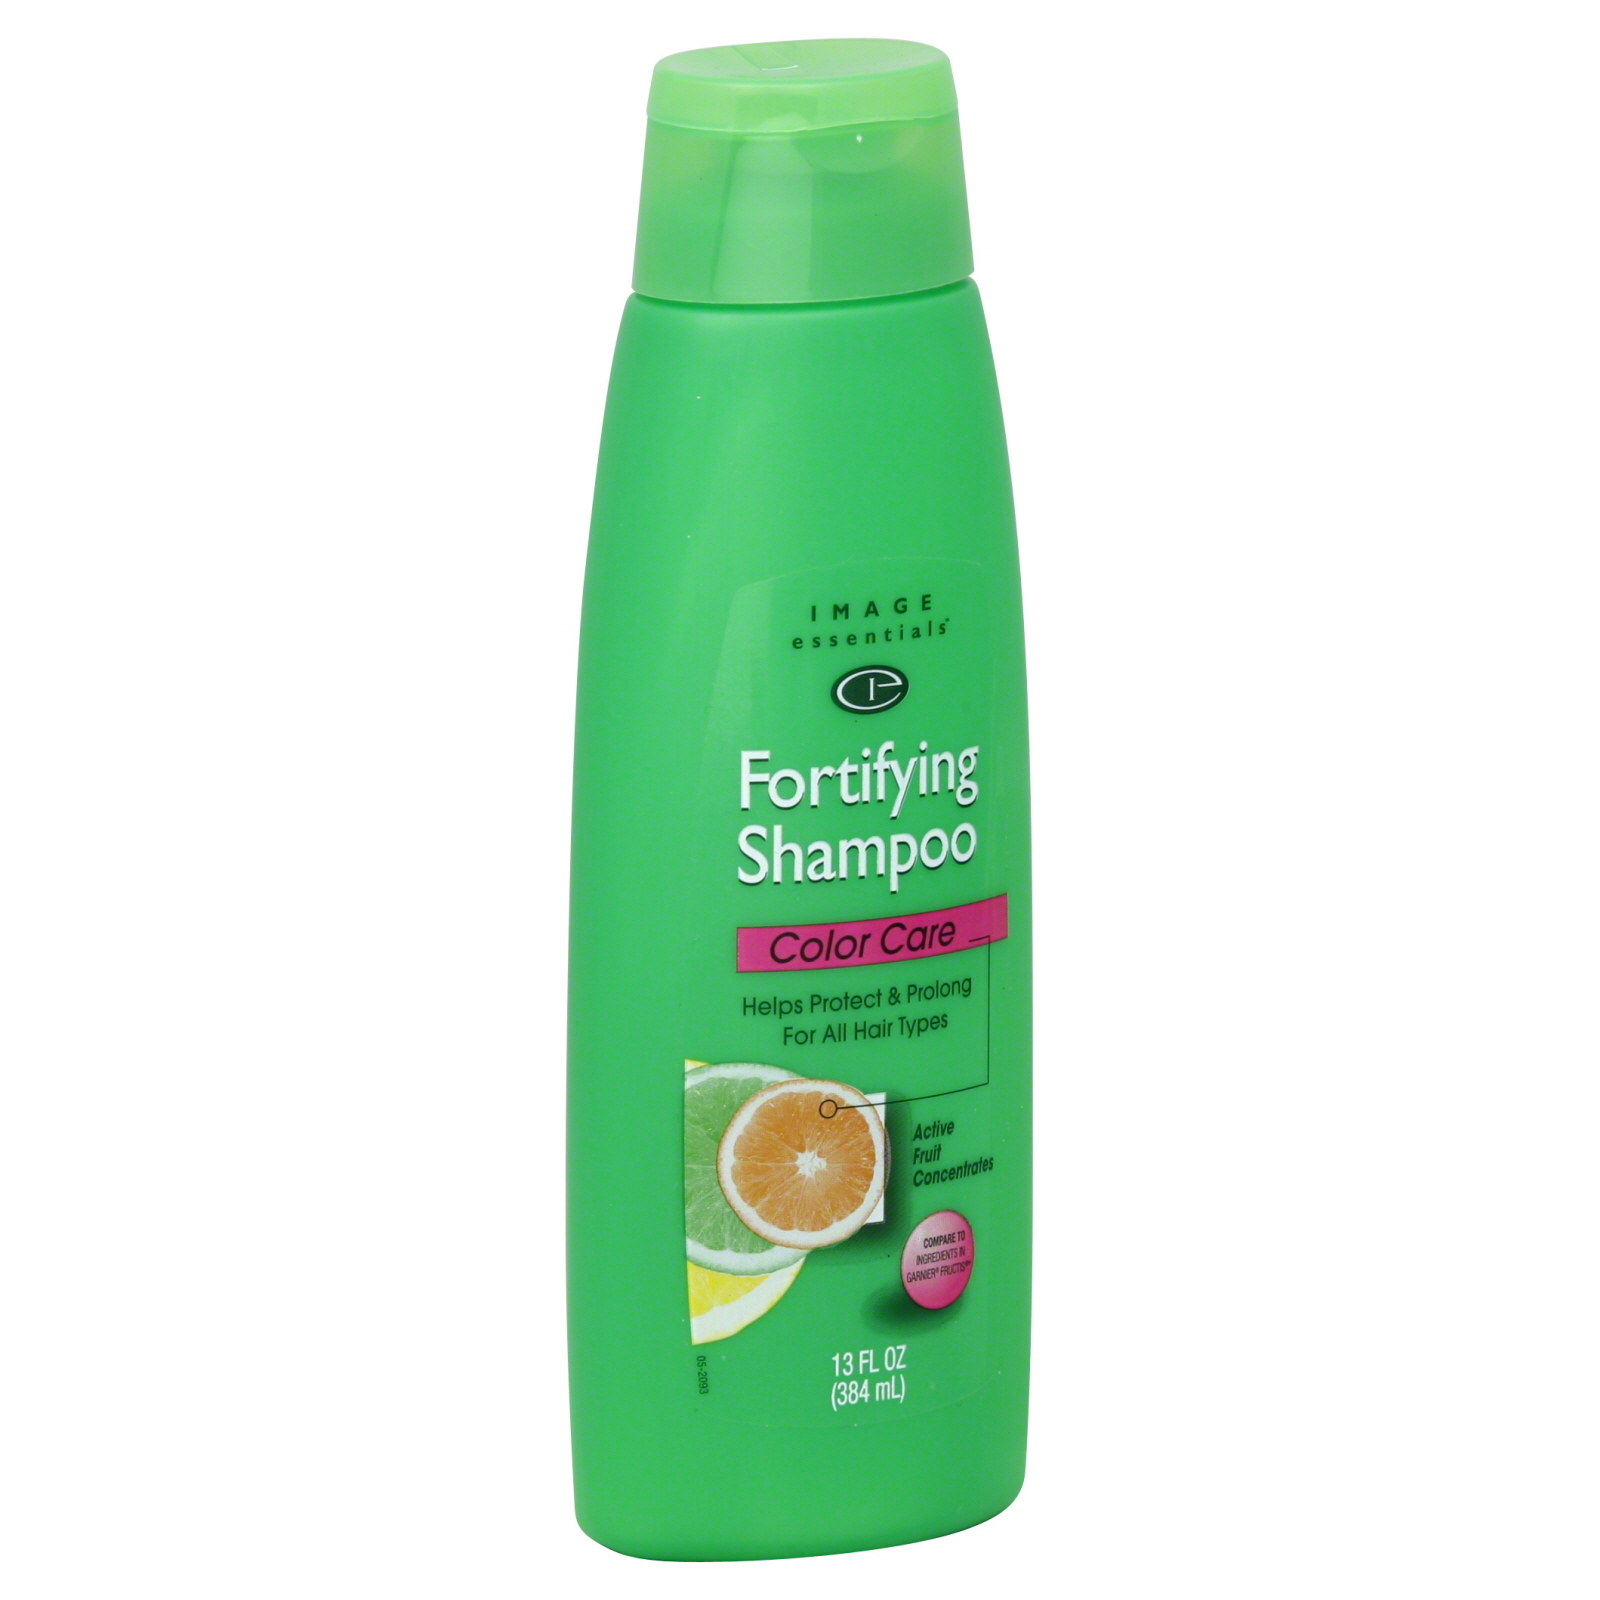 Image Essentials Shampoo, Fortifying, Color Care, 13 oz.